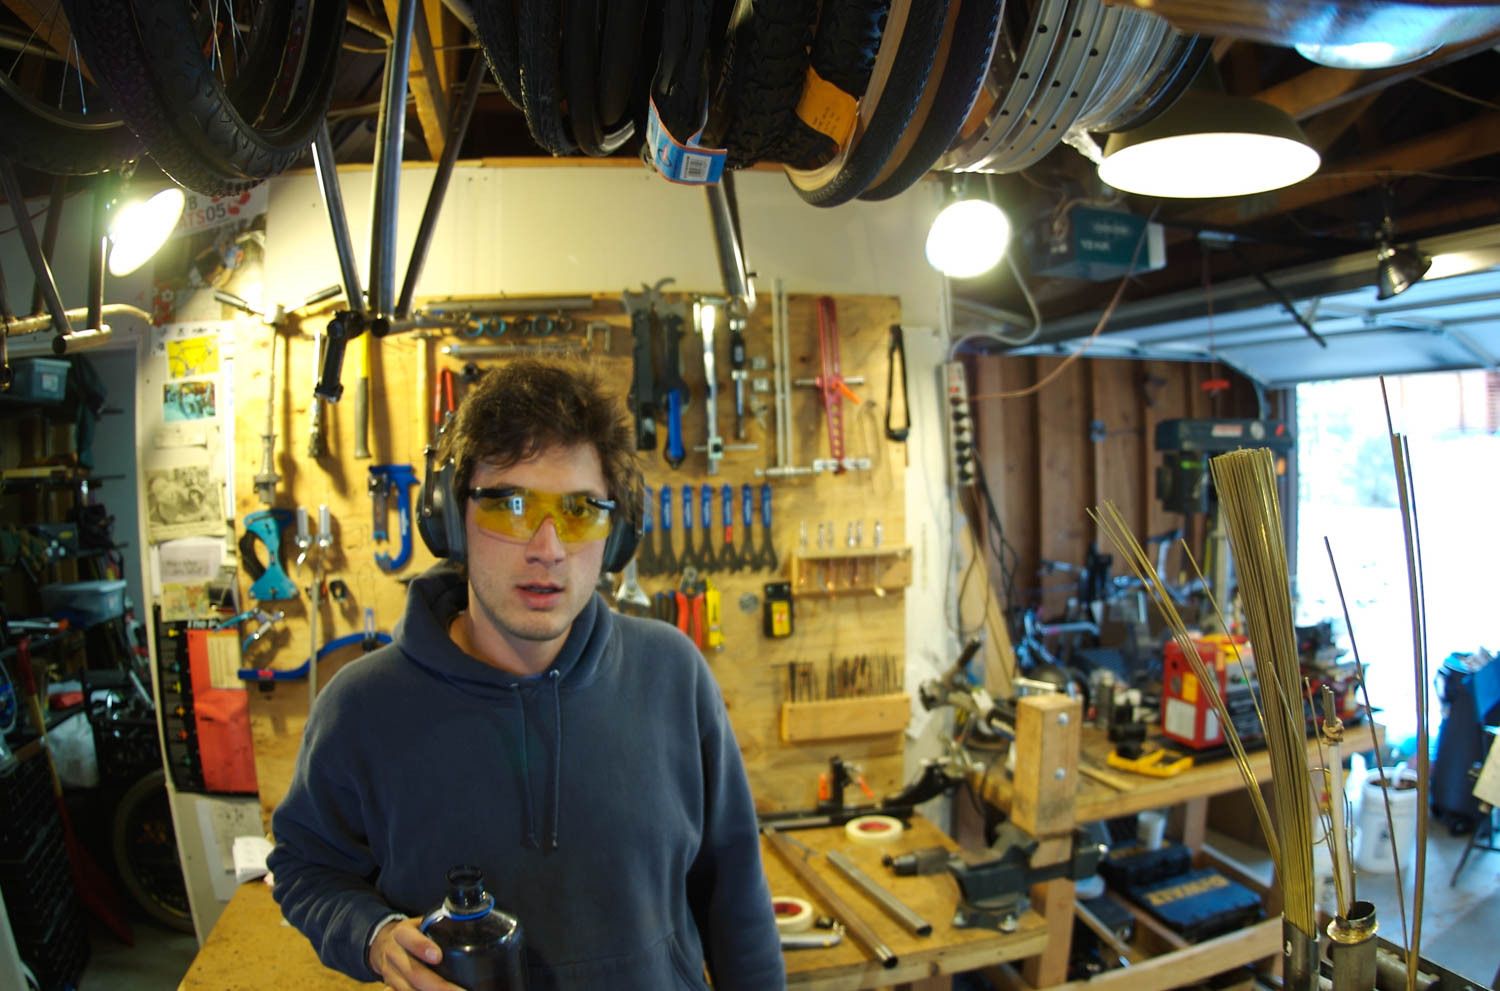 Spencer wearing PPE inside a workshop with tools on a plywood board, a workbench, and bike wheels hanging from the ceiling.